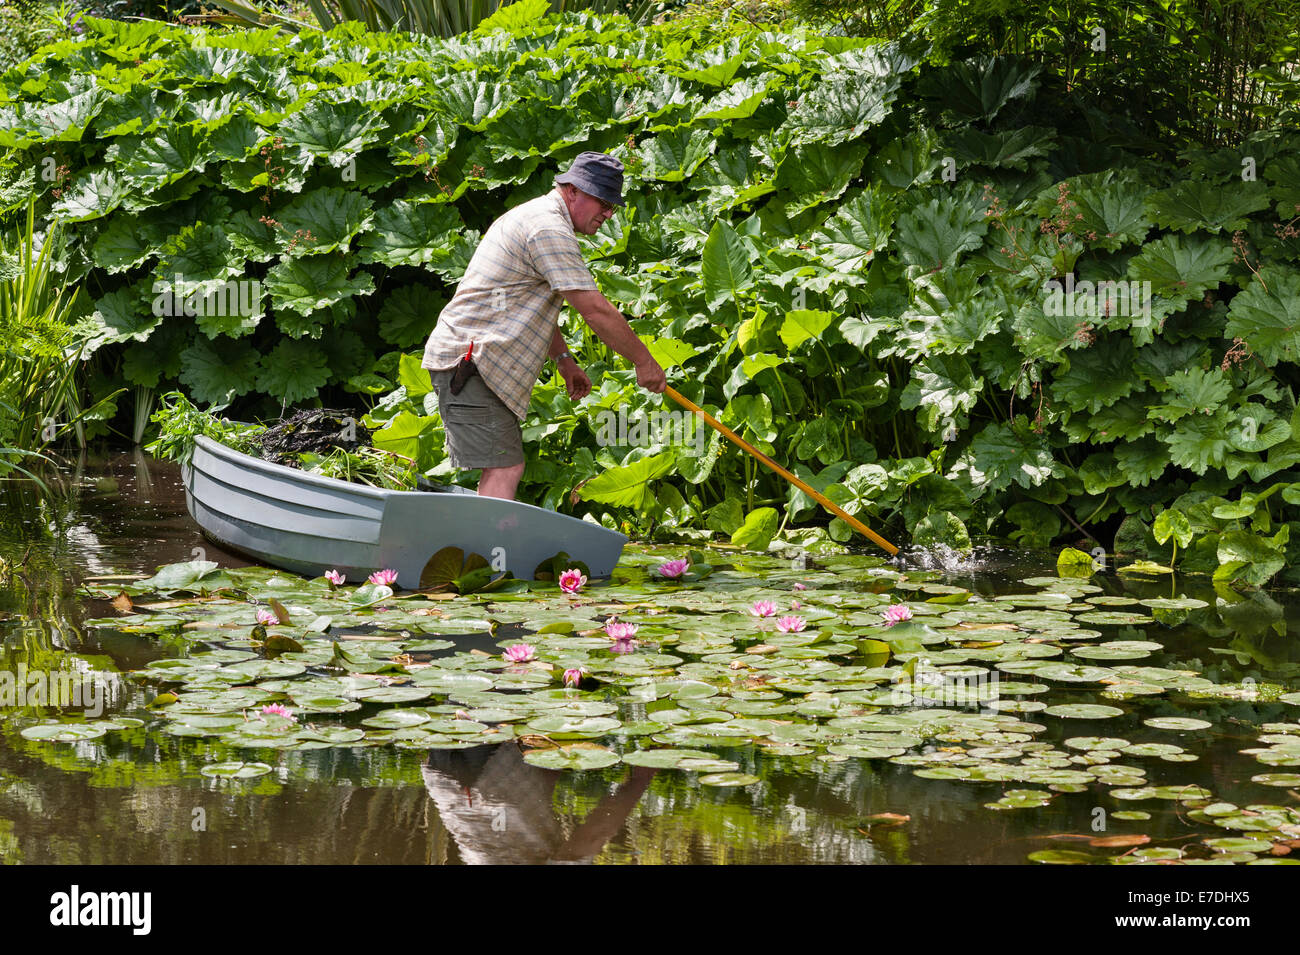 The Beth Chatto Gardens, Colchester, Essex, UK. A gardener at work raking weed out of the pond Stock Photo